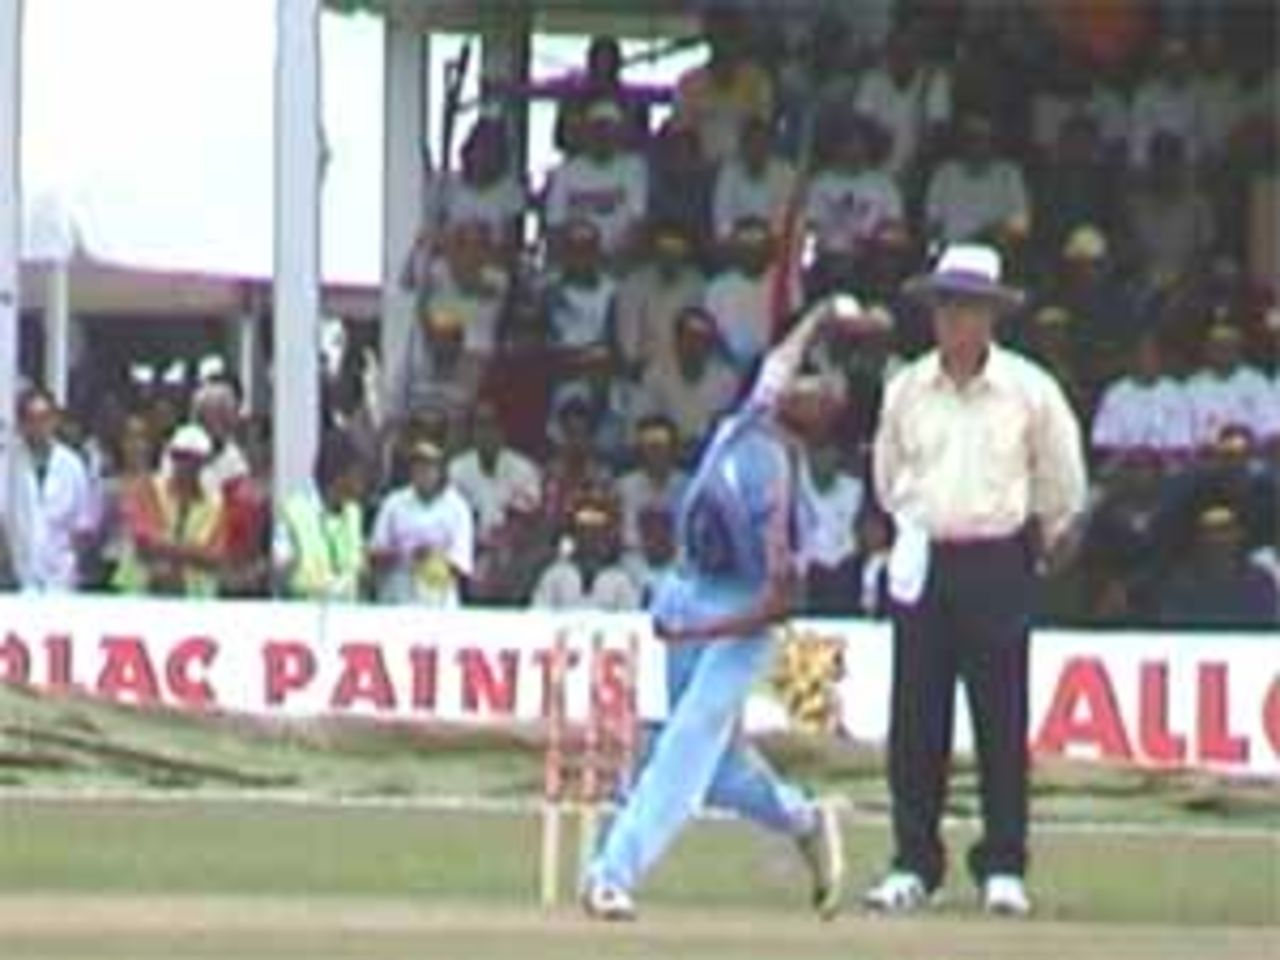 Shukla's bowling action, India v West Indies (3rd ODI), Coca-Cola Singapore Challenge, 1999-2000, Kallang Ground, Singapore, 5 Sep 1999.